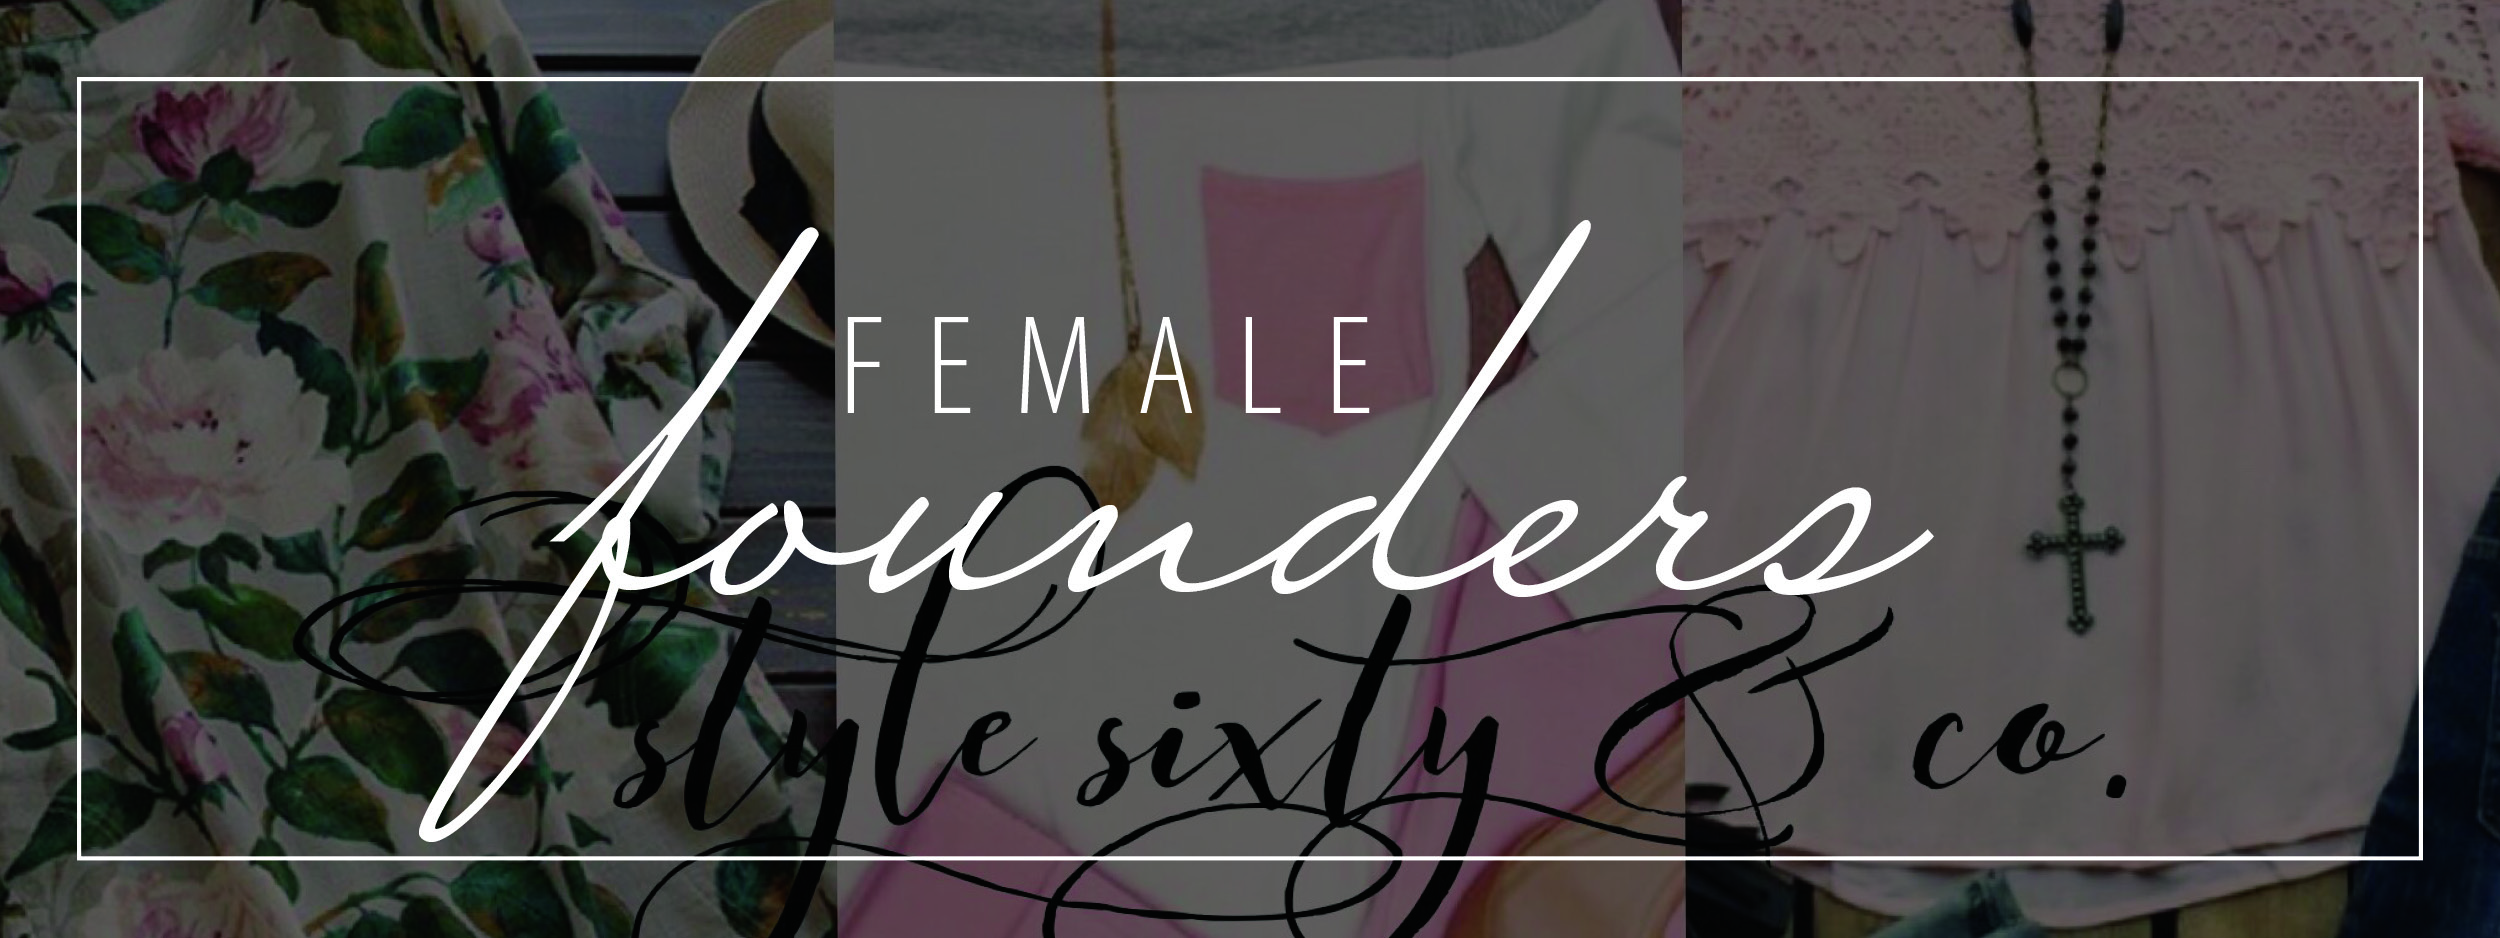 female founders written over style sixty and co logo